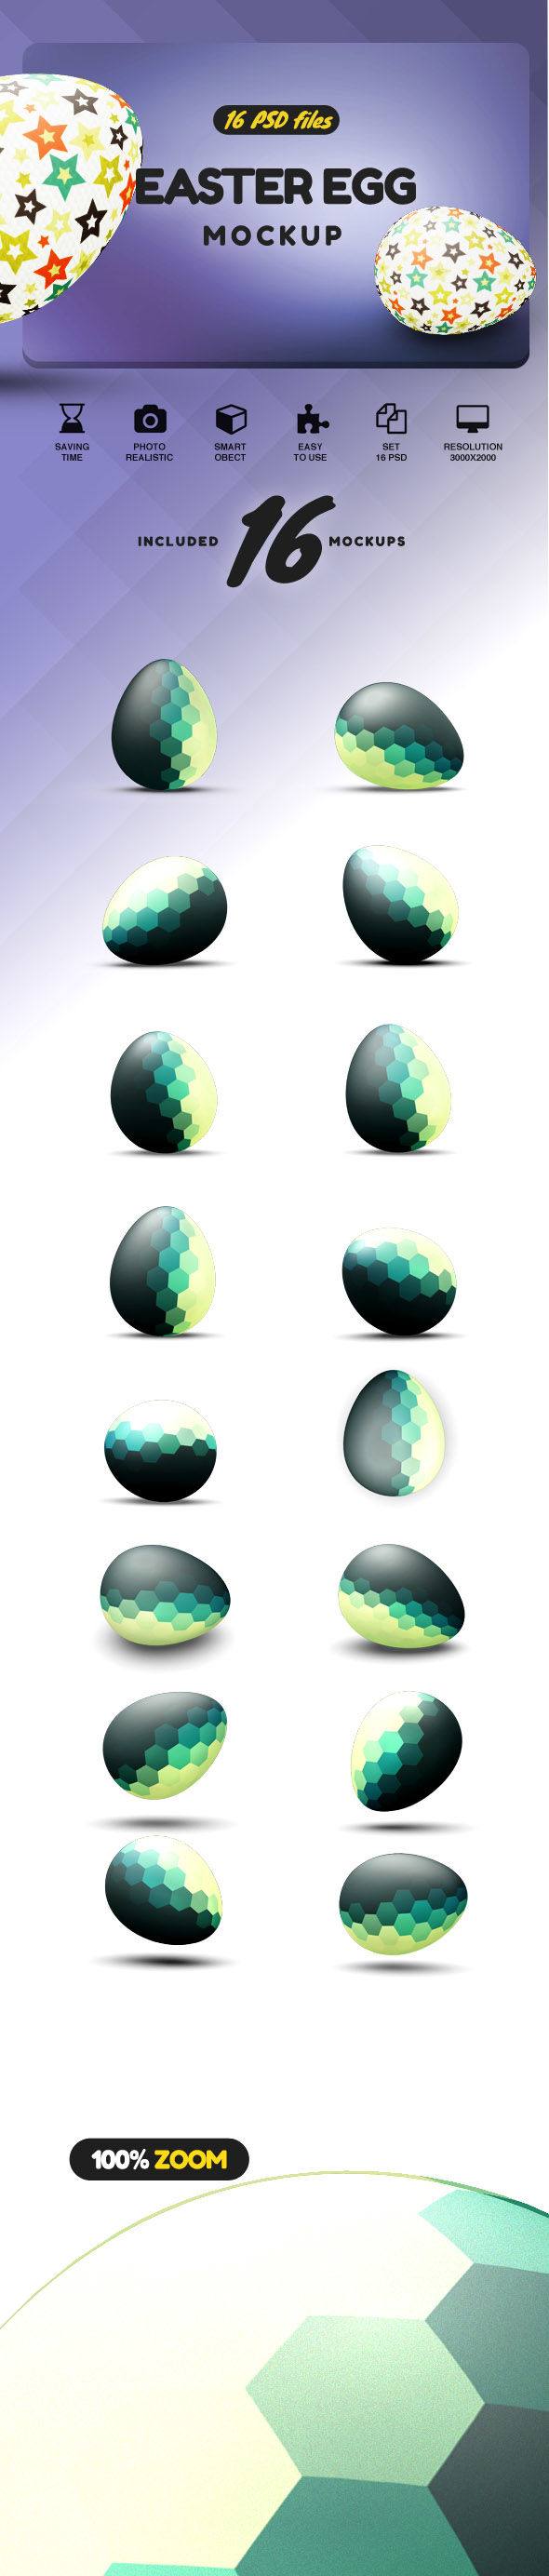 Download Easter Egg Mockup By Mock Up Store | TheHungryJPEG.com